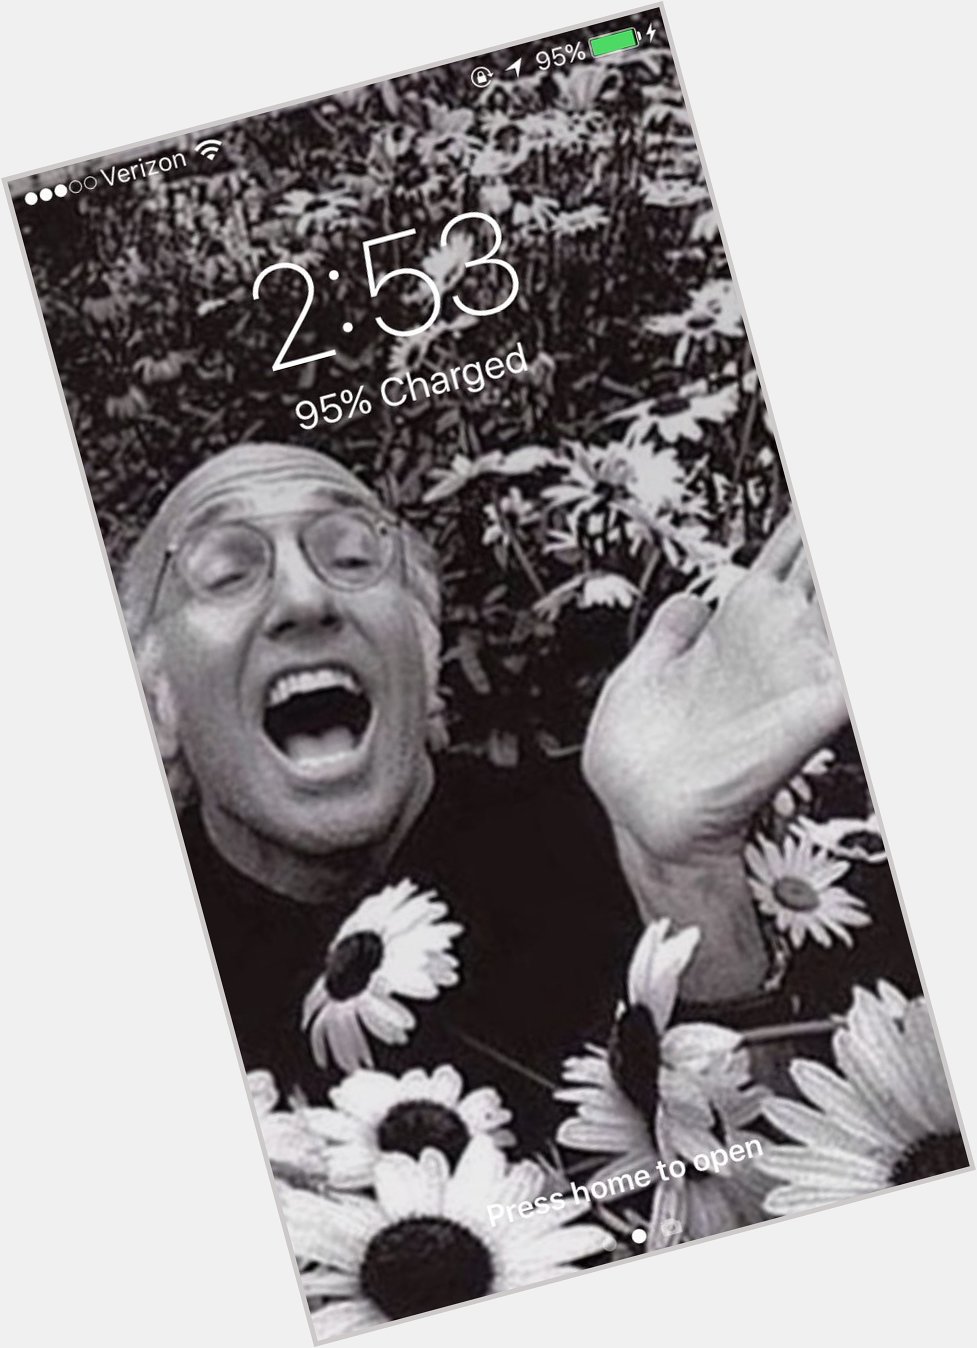 Happy birthday to the man who will always be my iPhone background. @ Larry David 